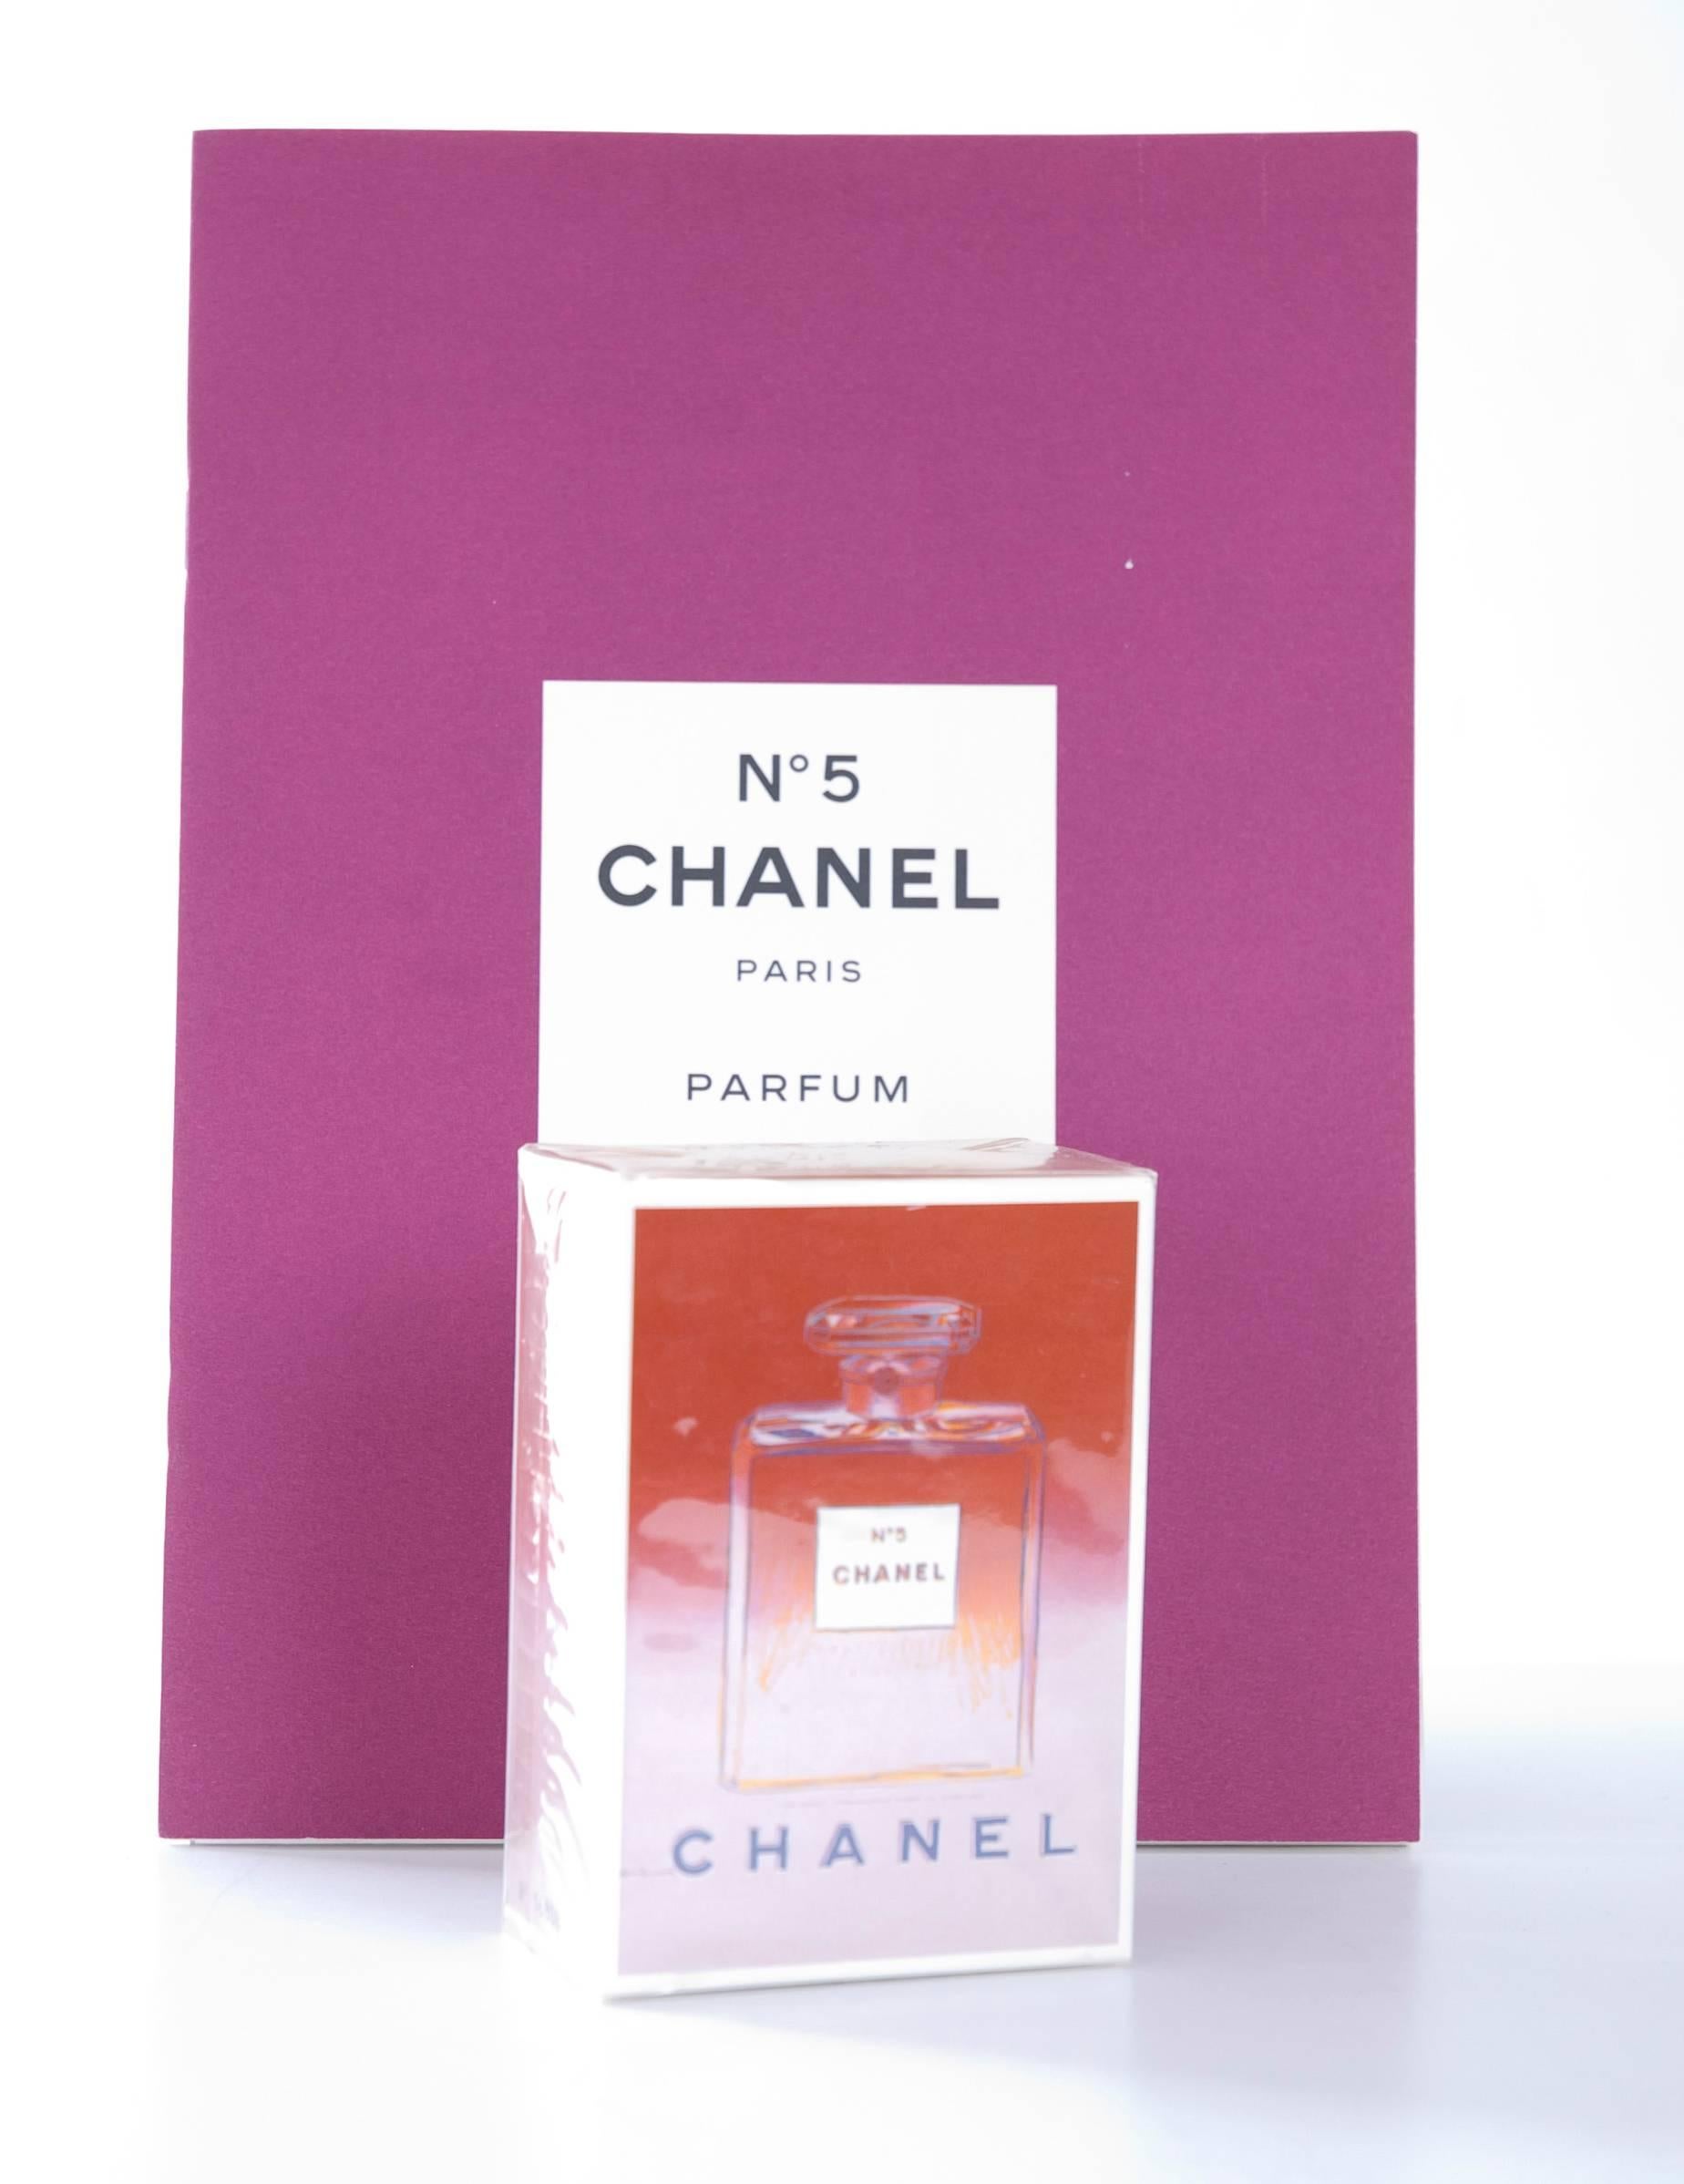 1997 Andy Warhol Chanel No 5 and Booklet with Poster For Sale 1